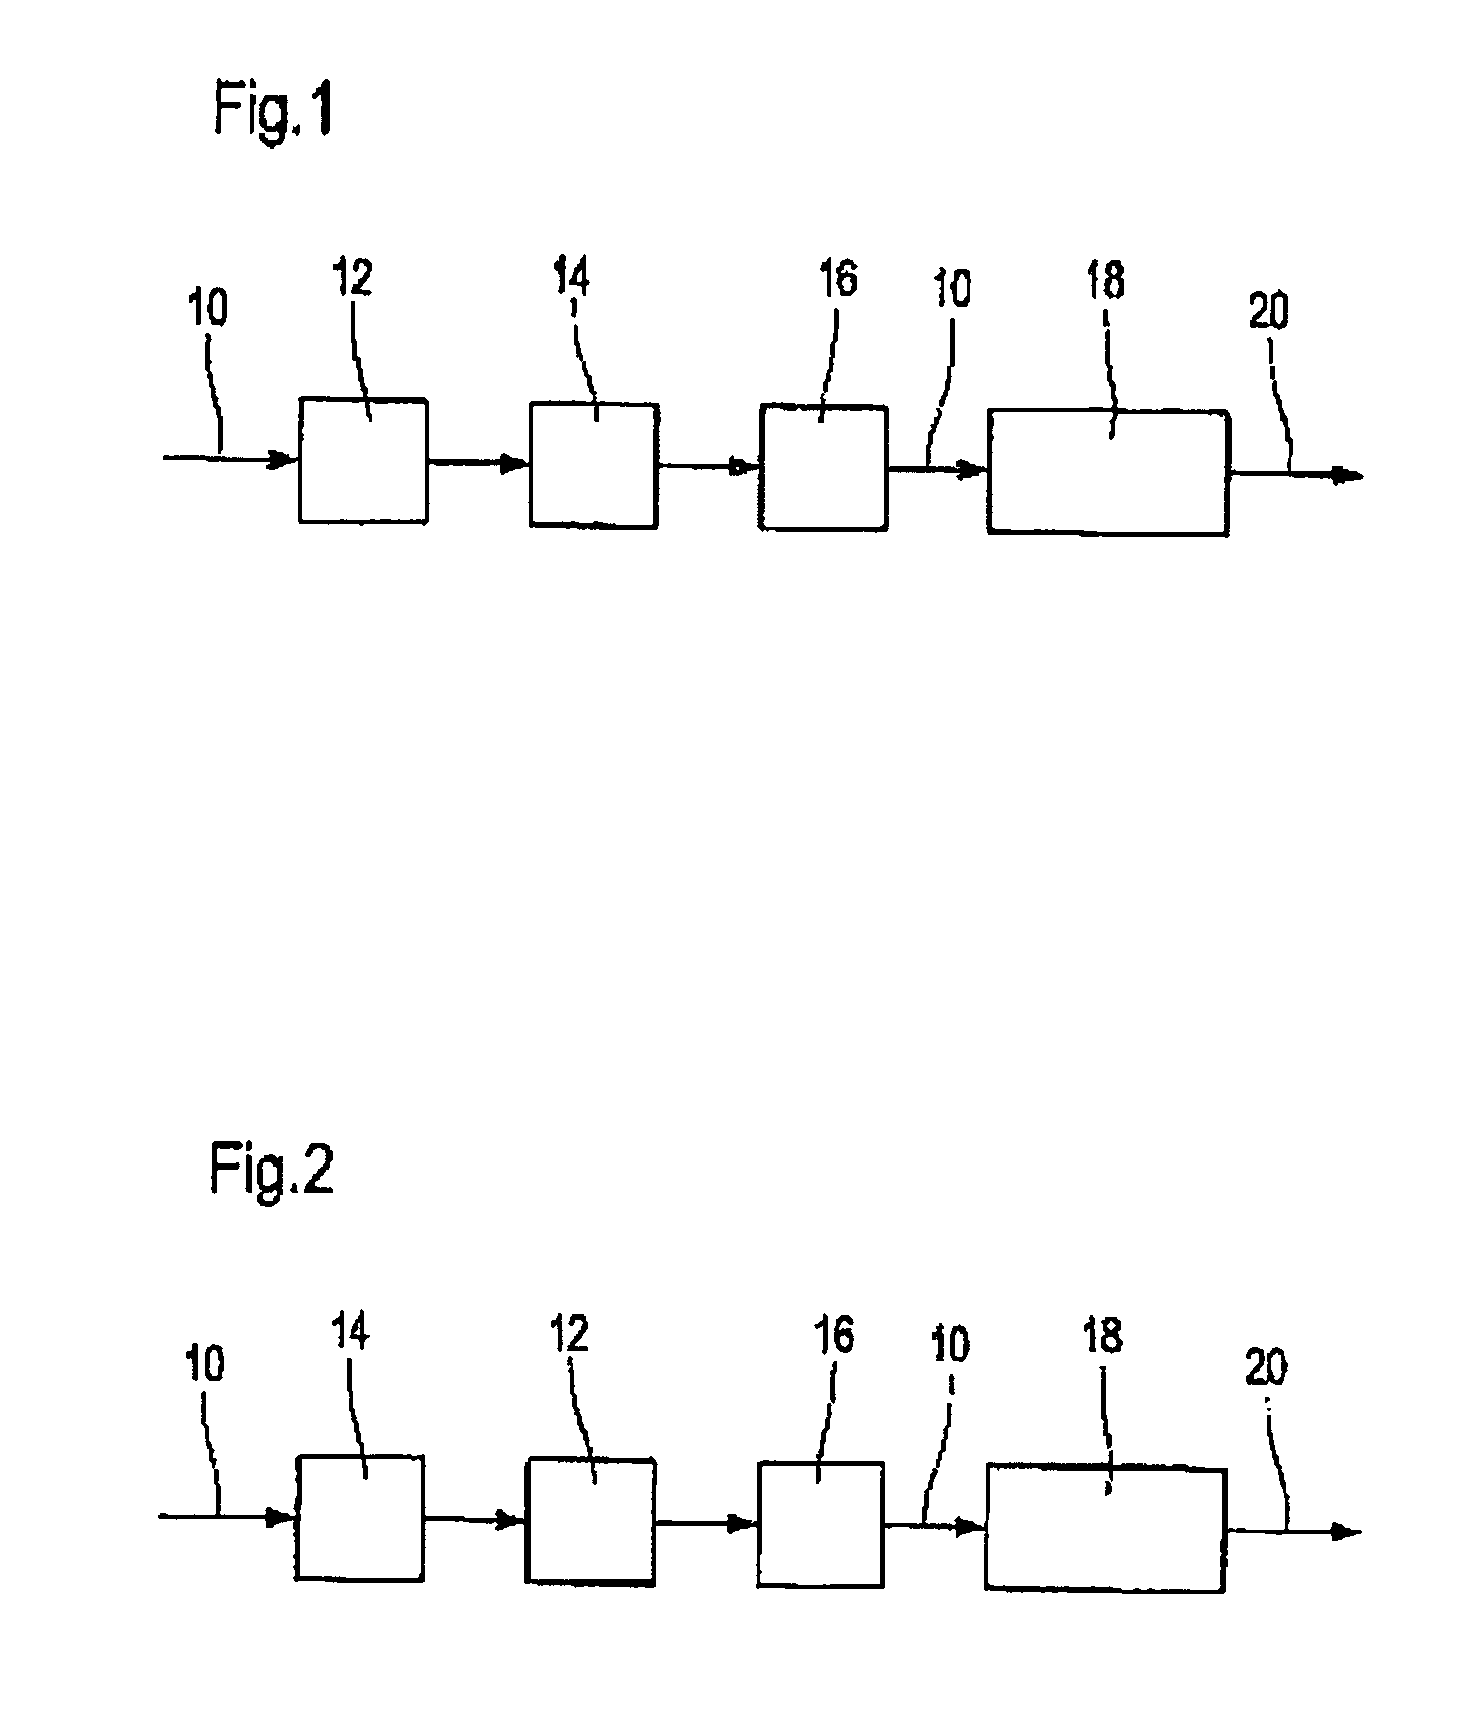 Method for creating a fibrous substance suspension used for producing a tissue web or hygiene web